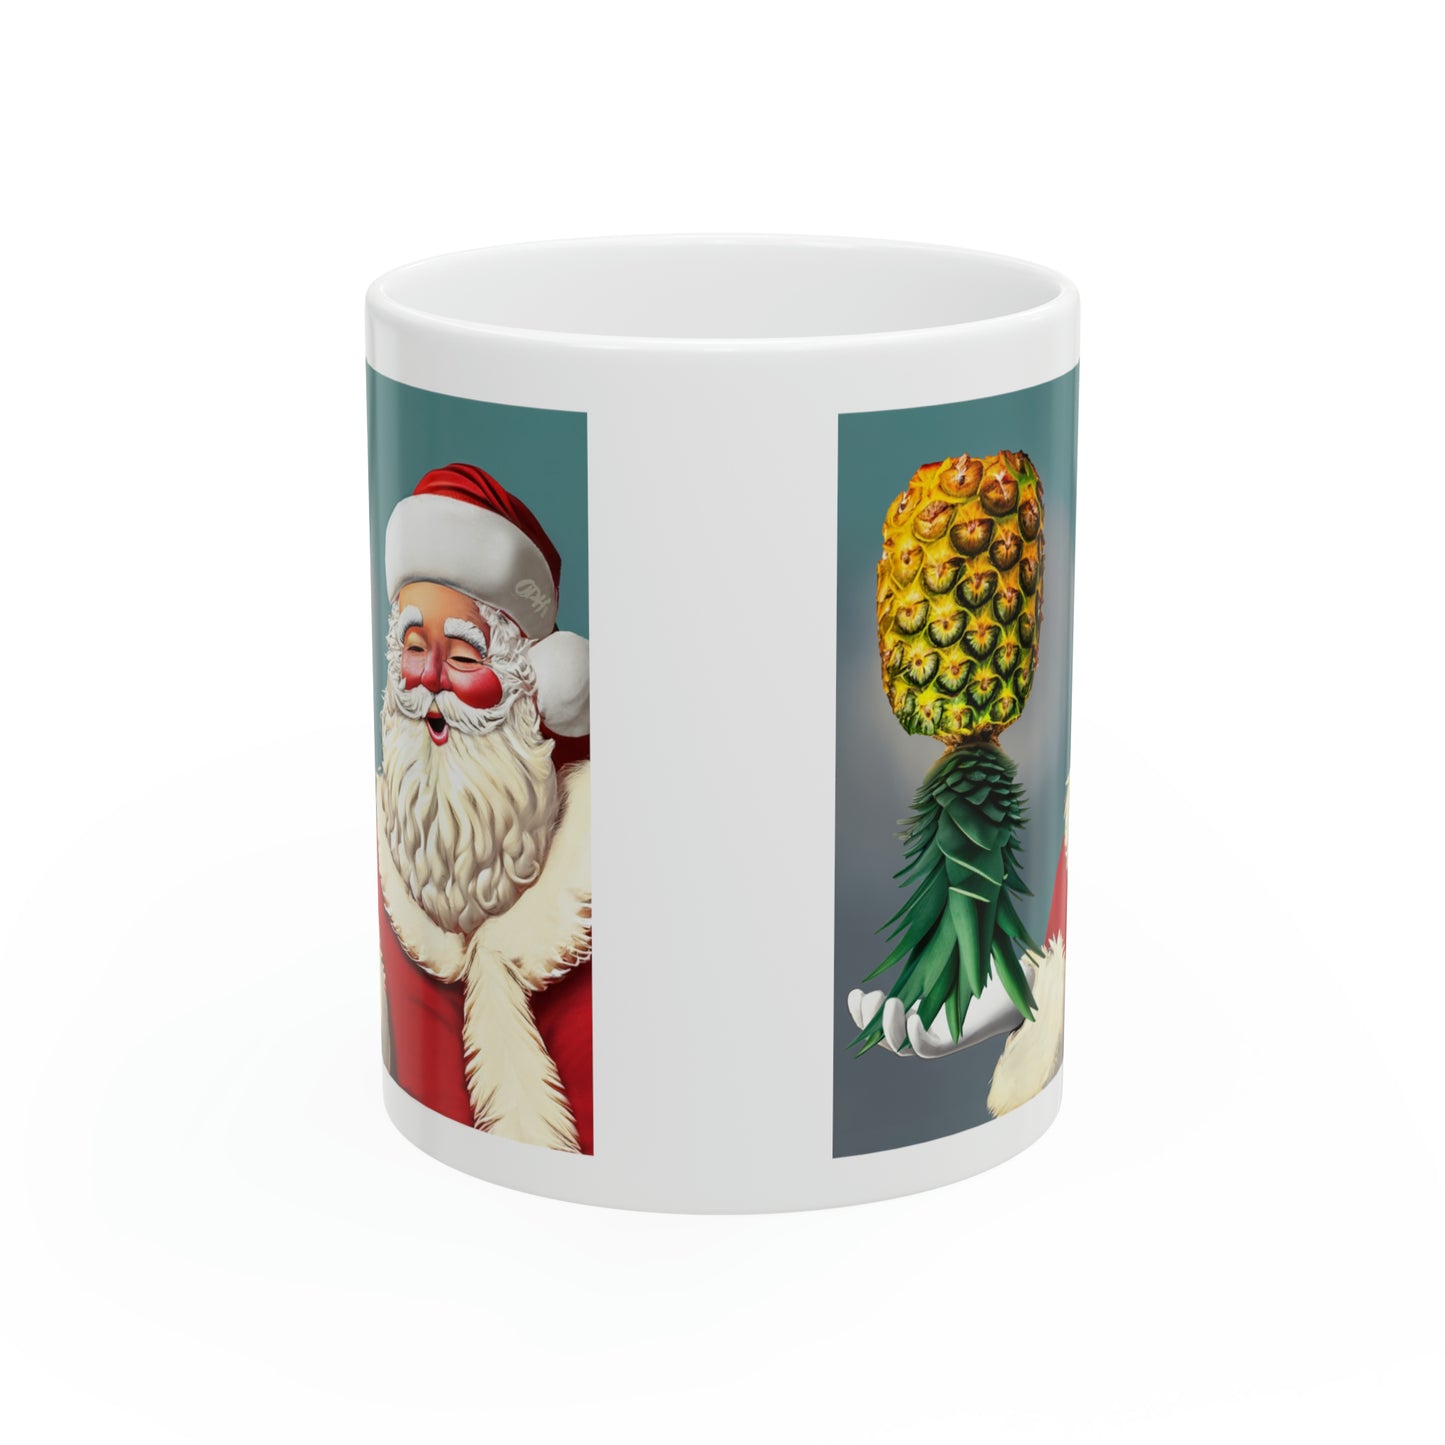 Upside Down Pineapple Santa Claus Christmas Mug Ceramic Mug 11oz Swinger Party Plays Well With Others